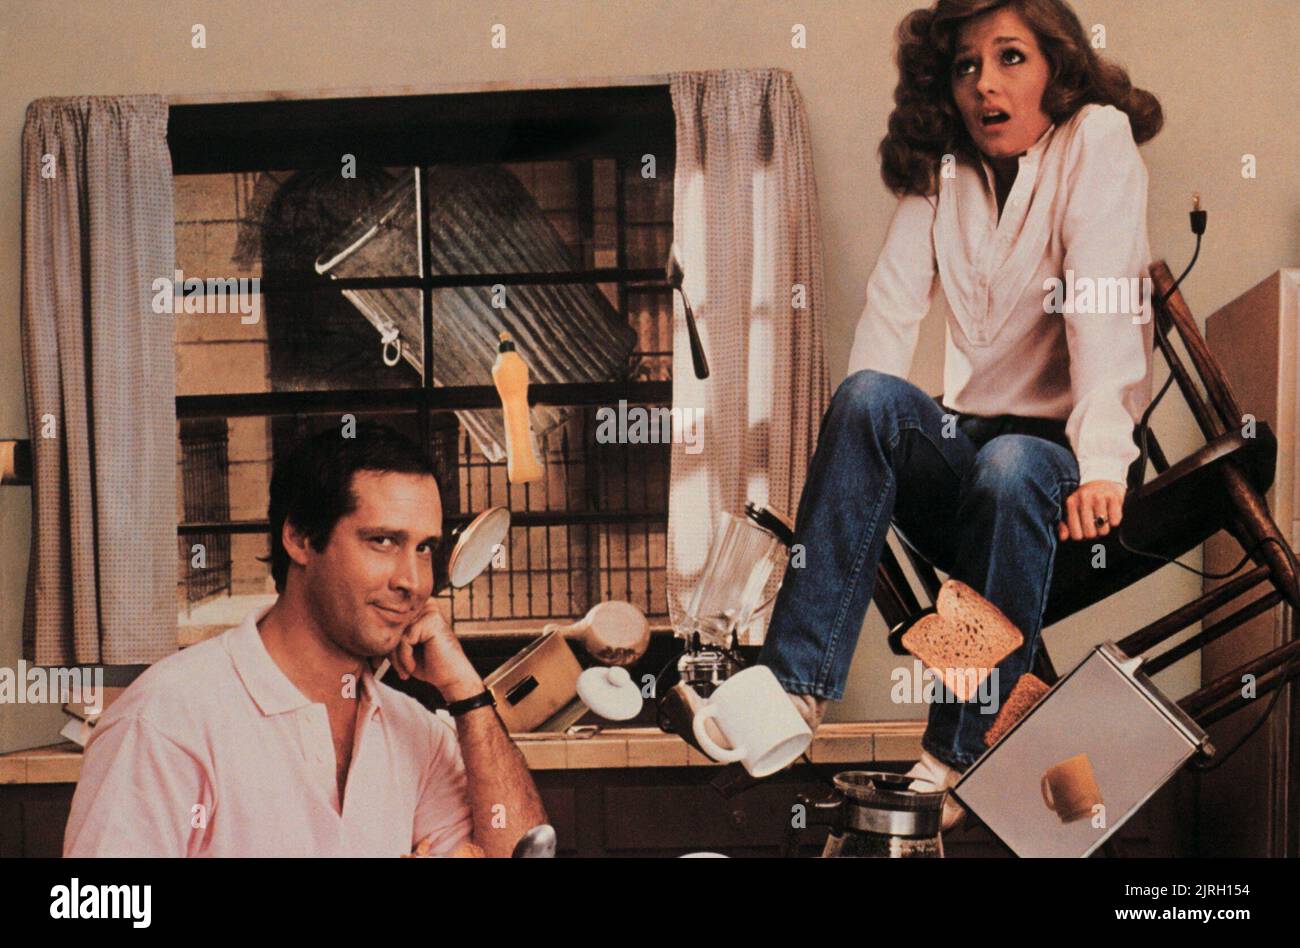 CHEVY CHASE, Mary Kay PLACE, problèmes modernes, 1981 Banque D'Images